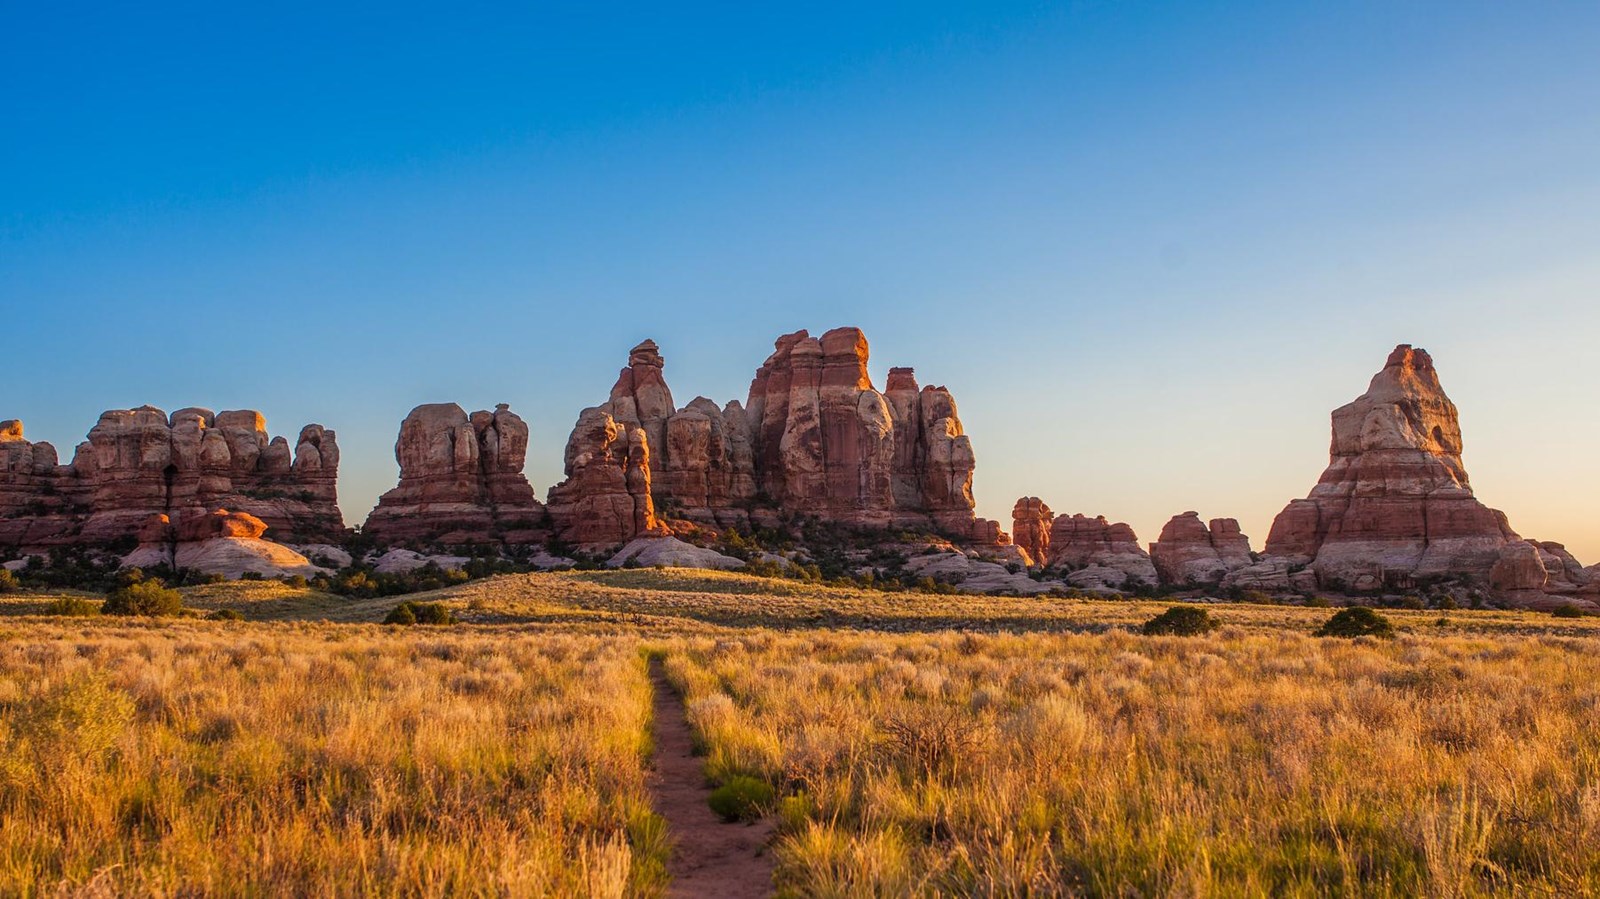 Multicolored sandstone spires in a yellow meadow at sunset